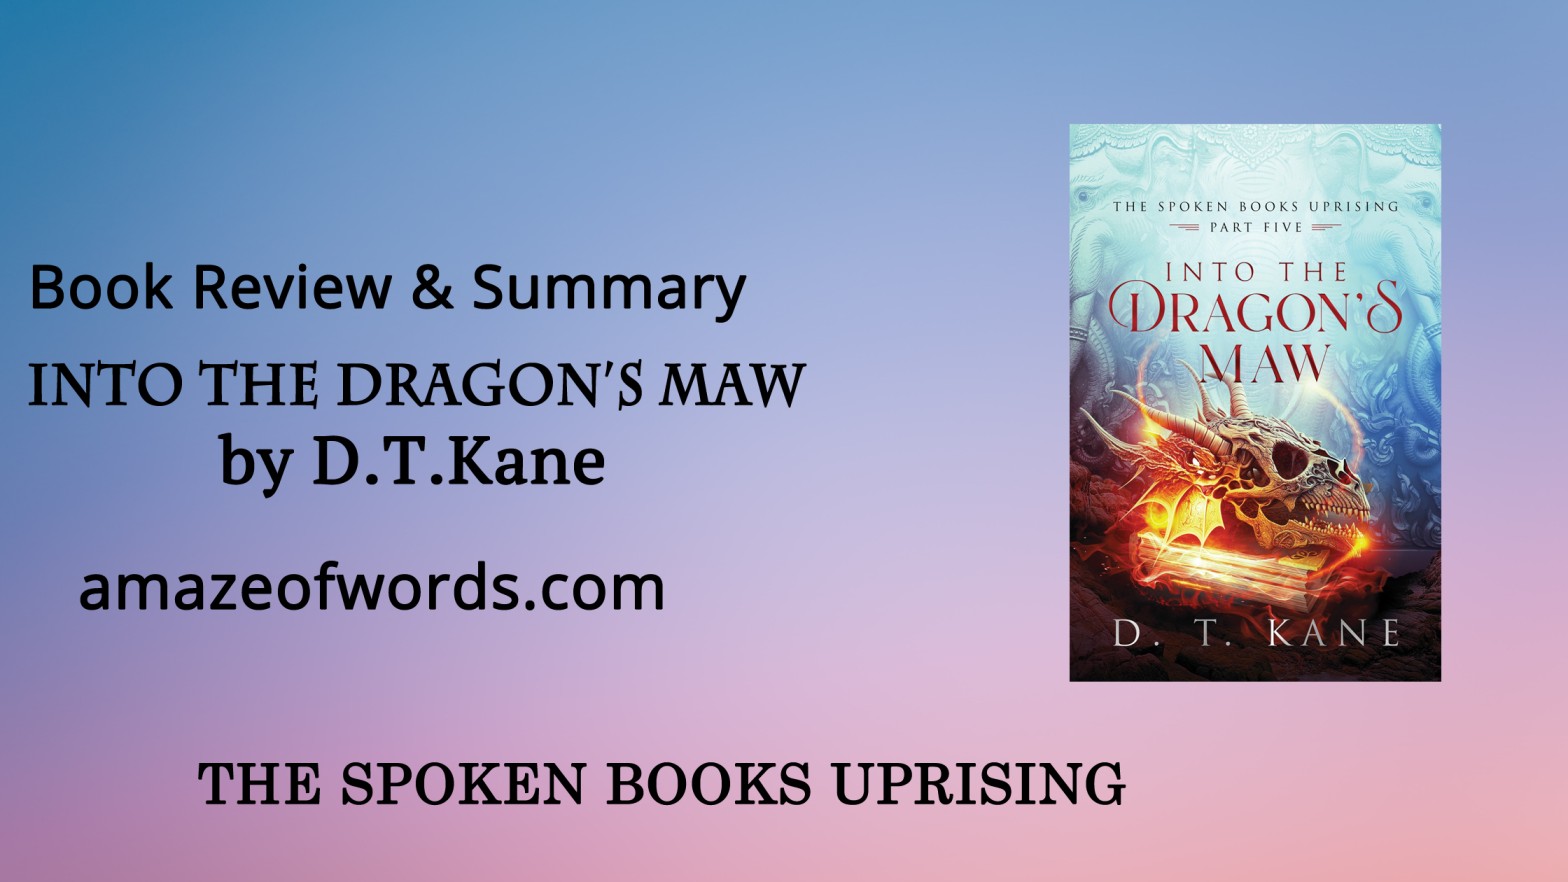 Into the Dragon’s Maw by D.T.Kane — Book Review & Summary